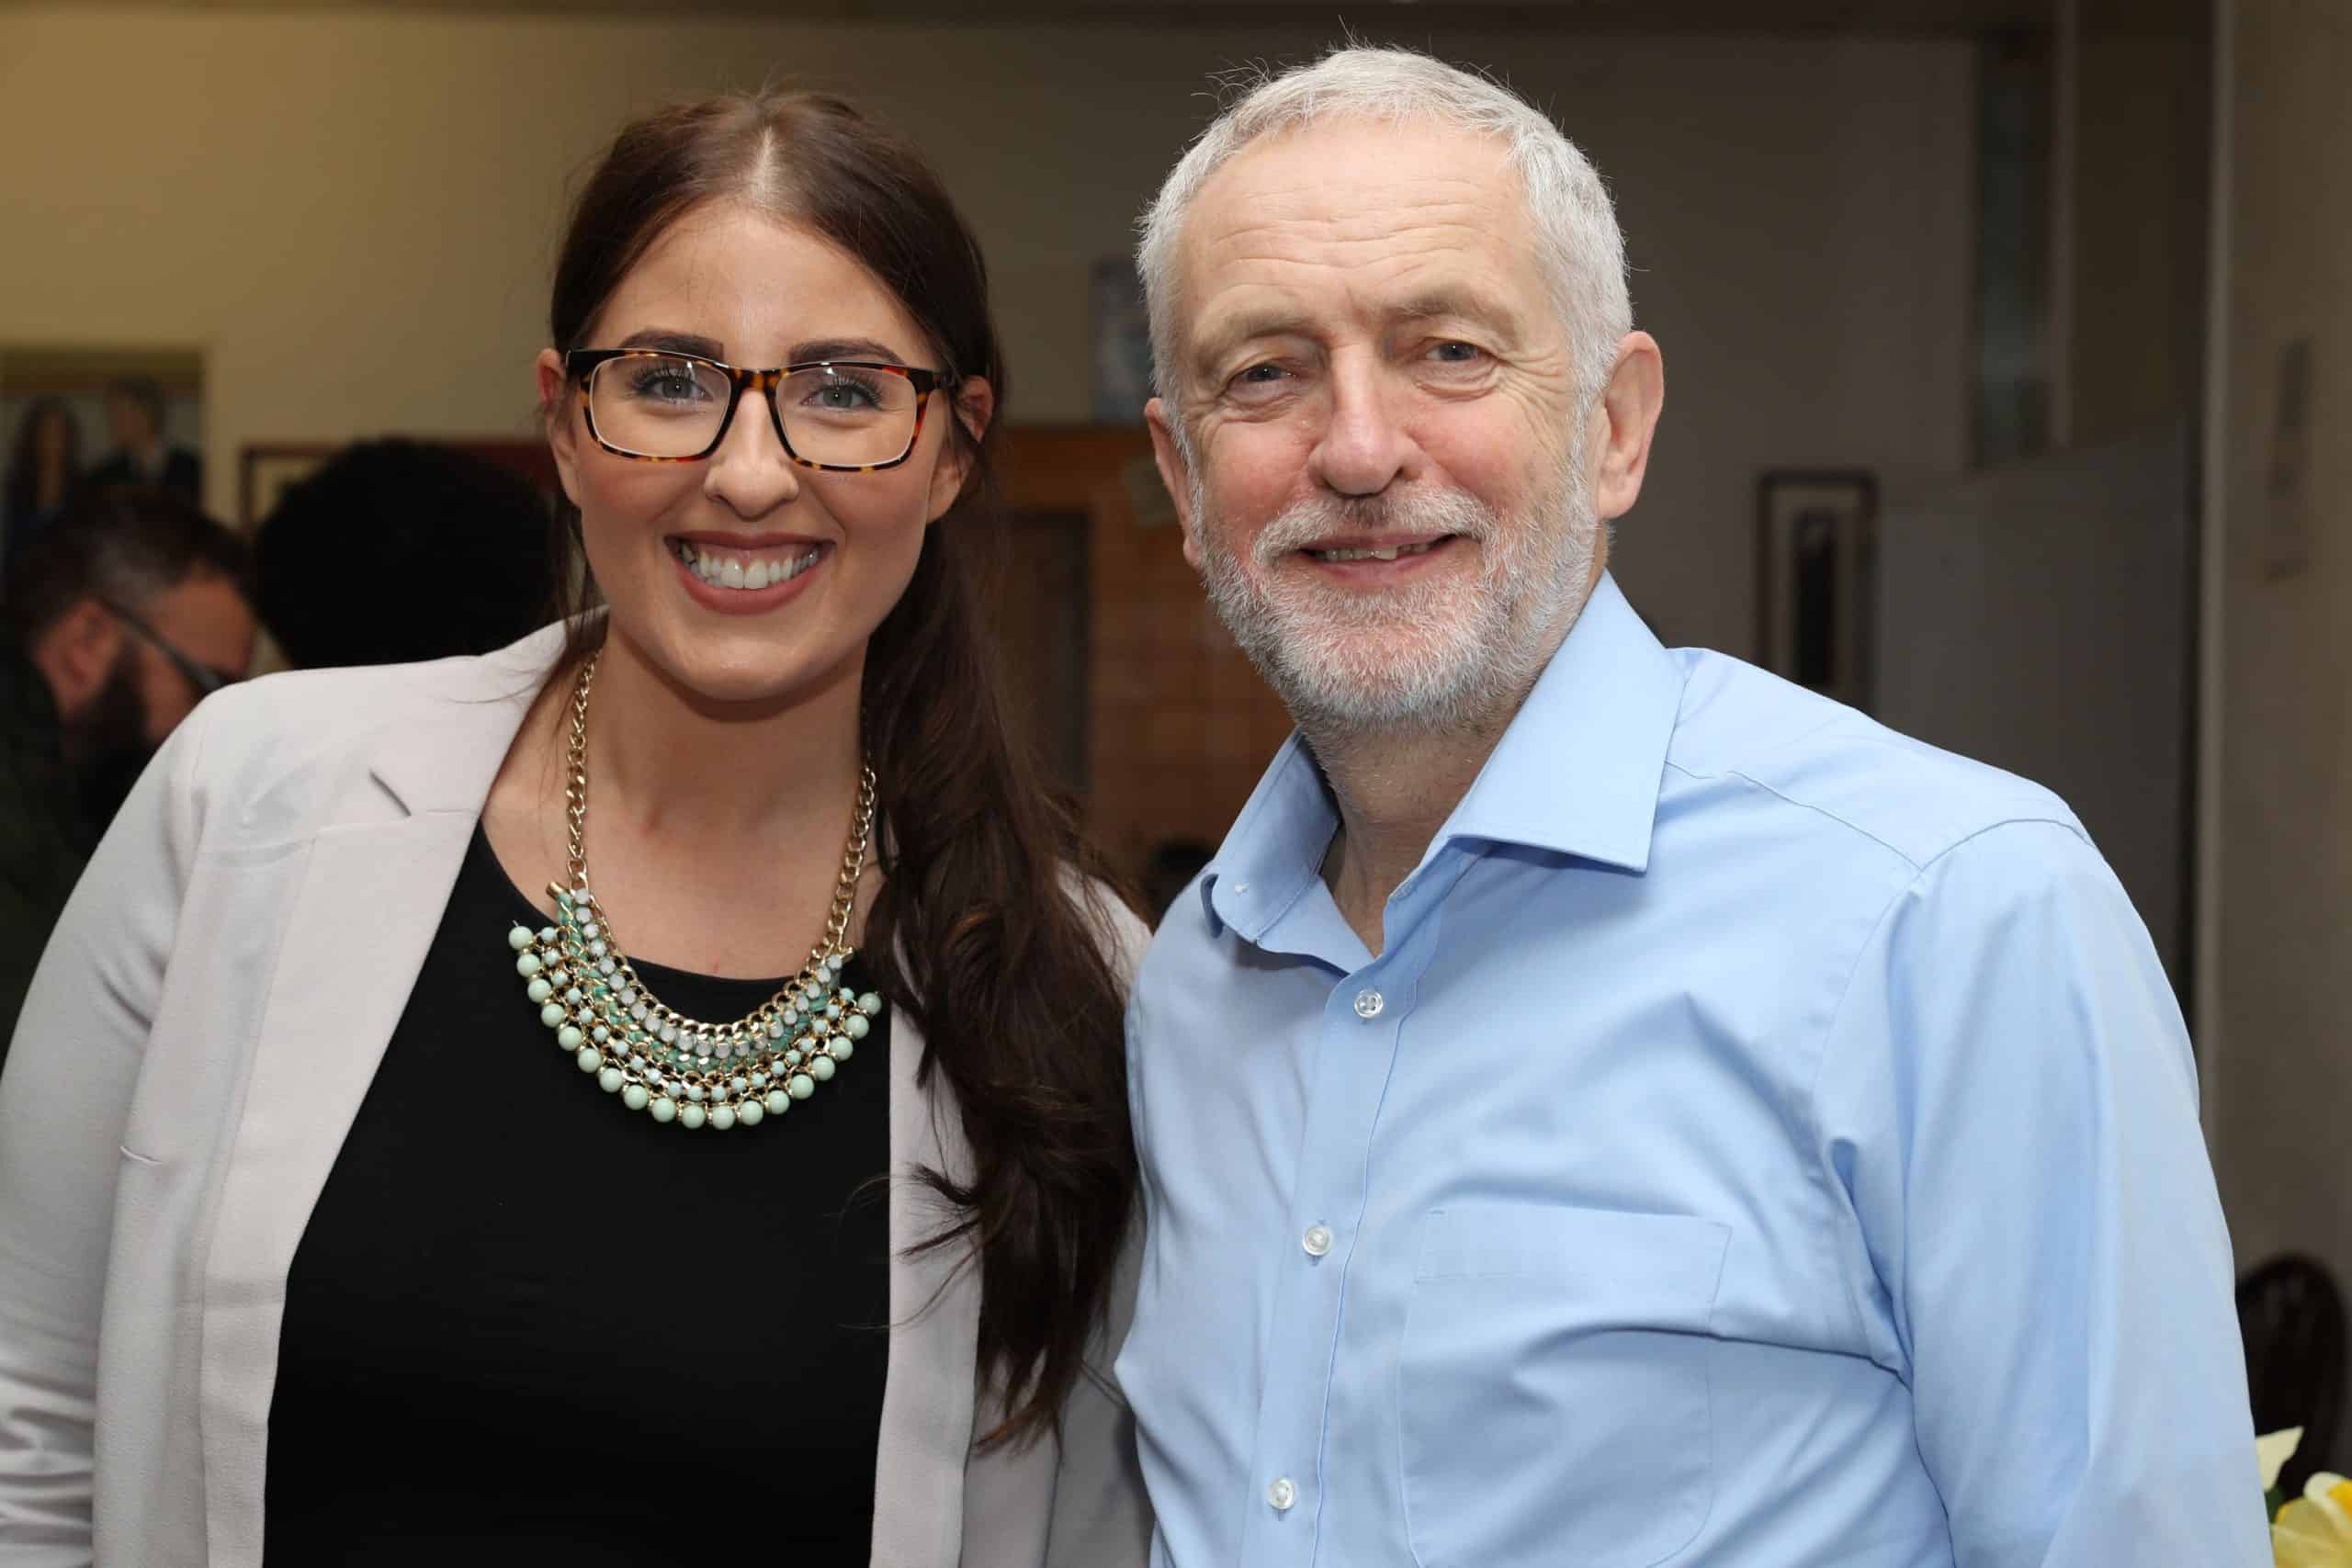 Top Corbynite quits Labour NEC, bashing Starmer’s ‘lack of vision’